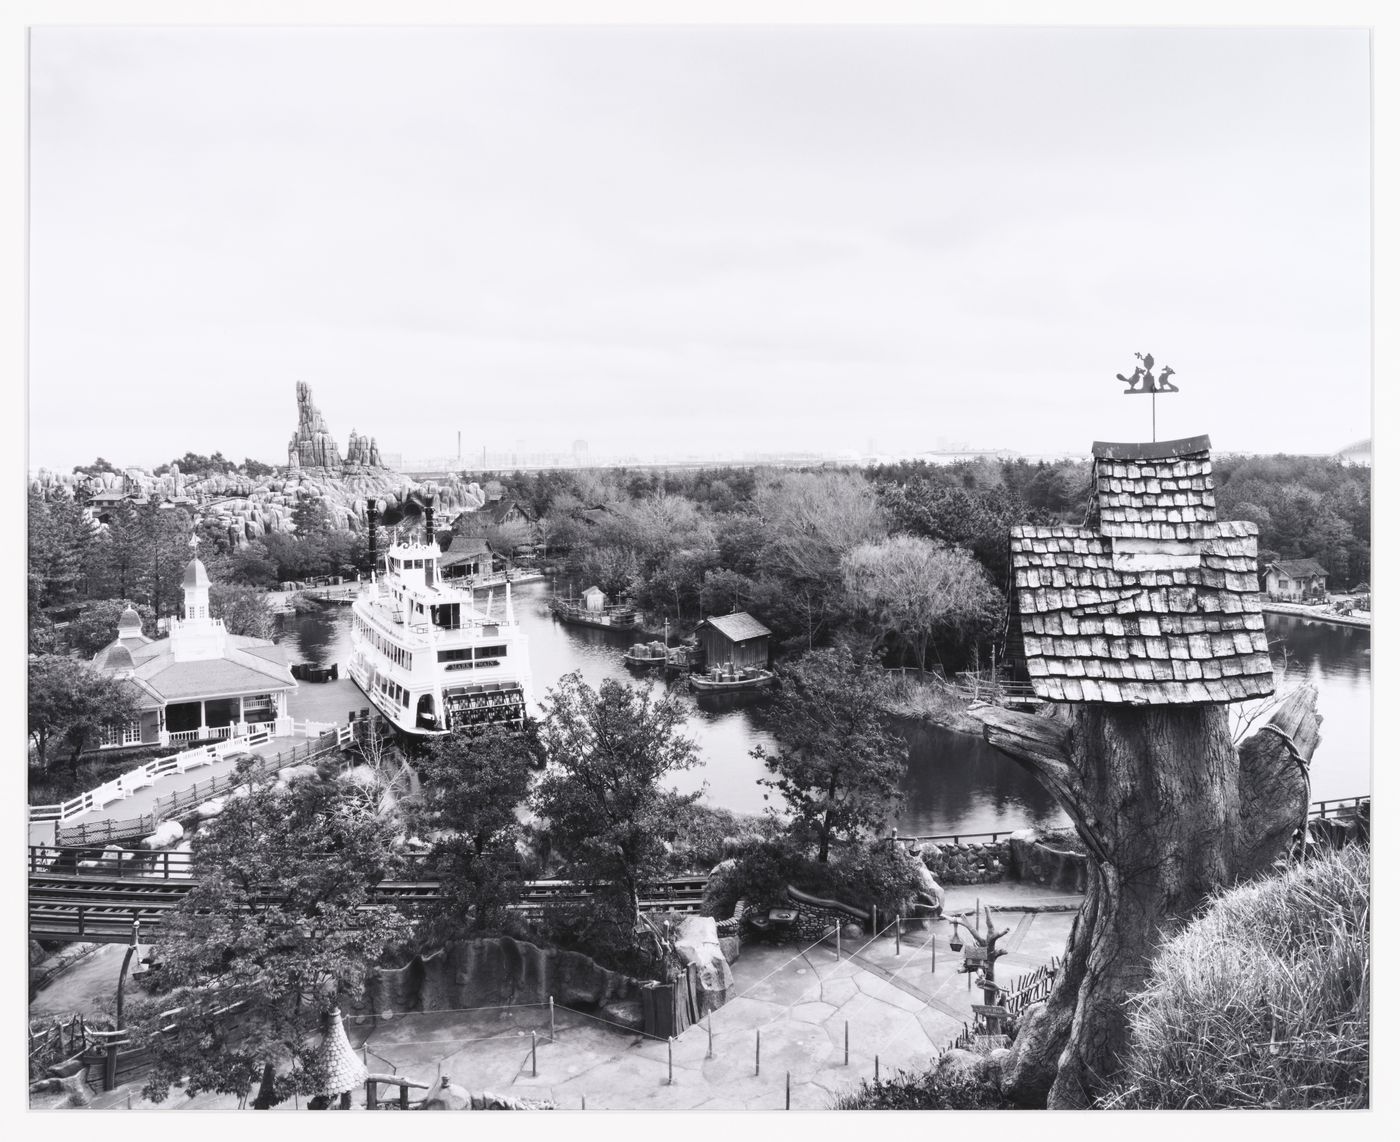 View of Westernland with Mark Twain-style boat, Disneyland, Tokyo, Japan